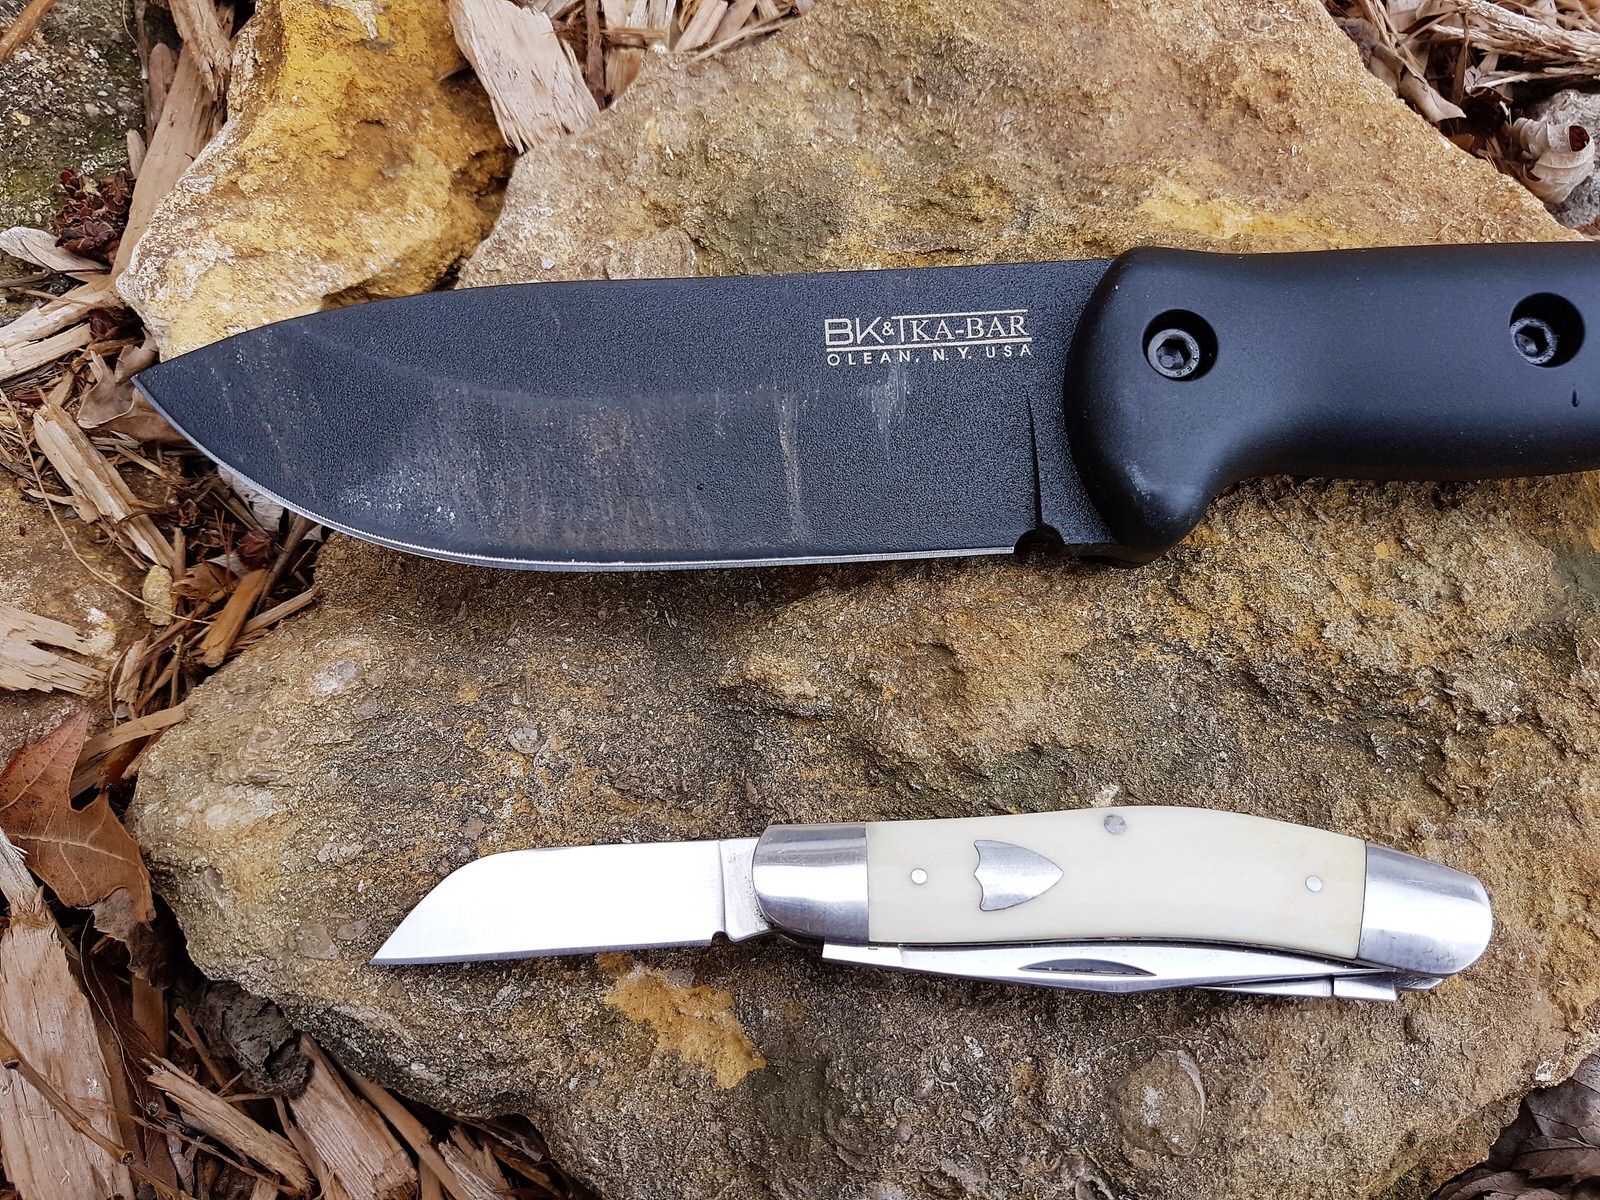 AG Russell Serpentine Stockman slipjoint with white bone compared to Ka-Bar Companion fixed blade